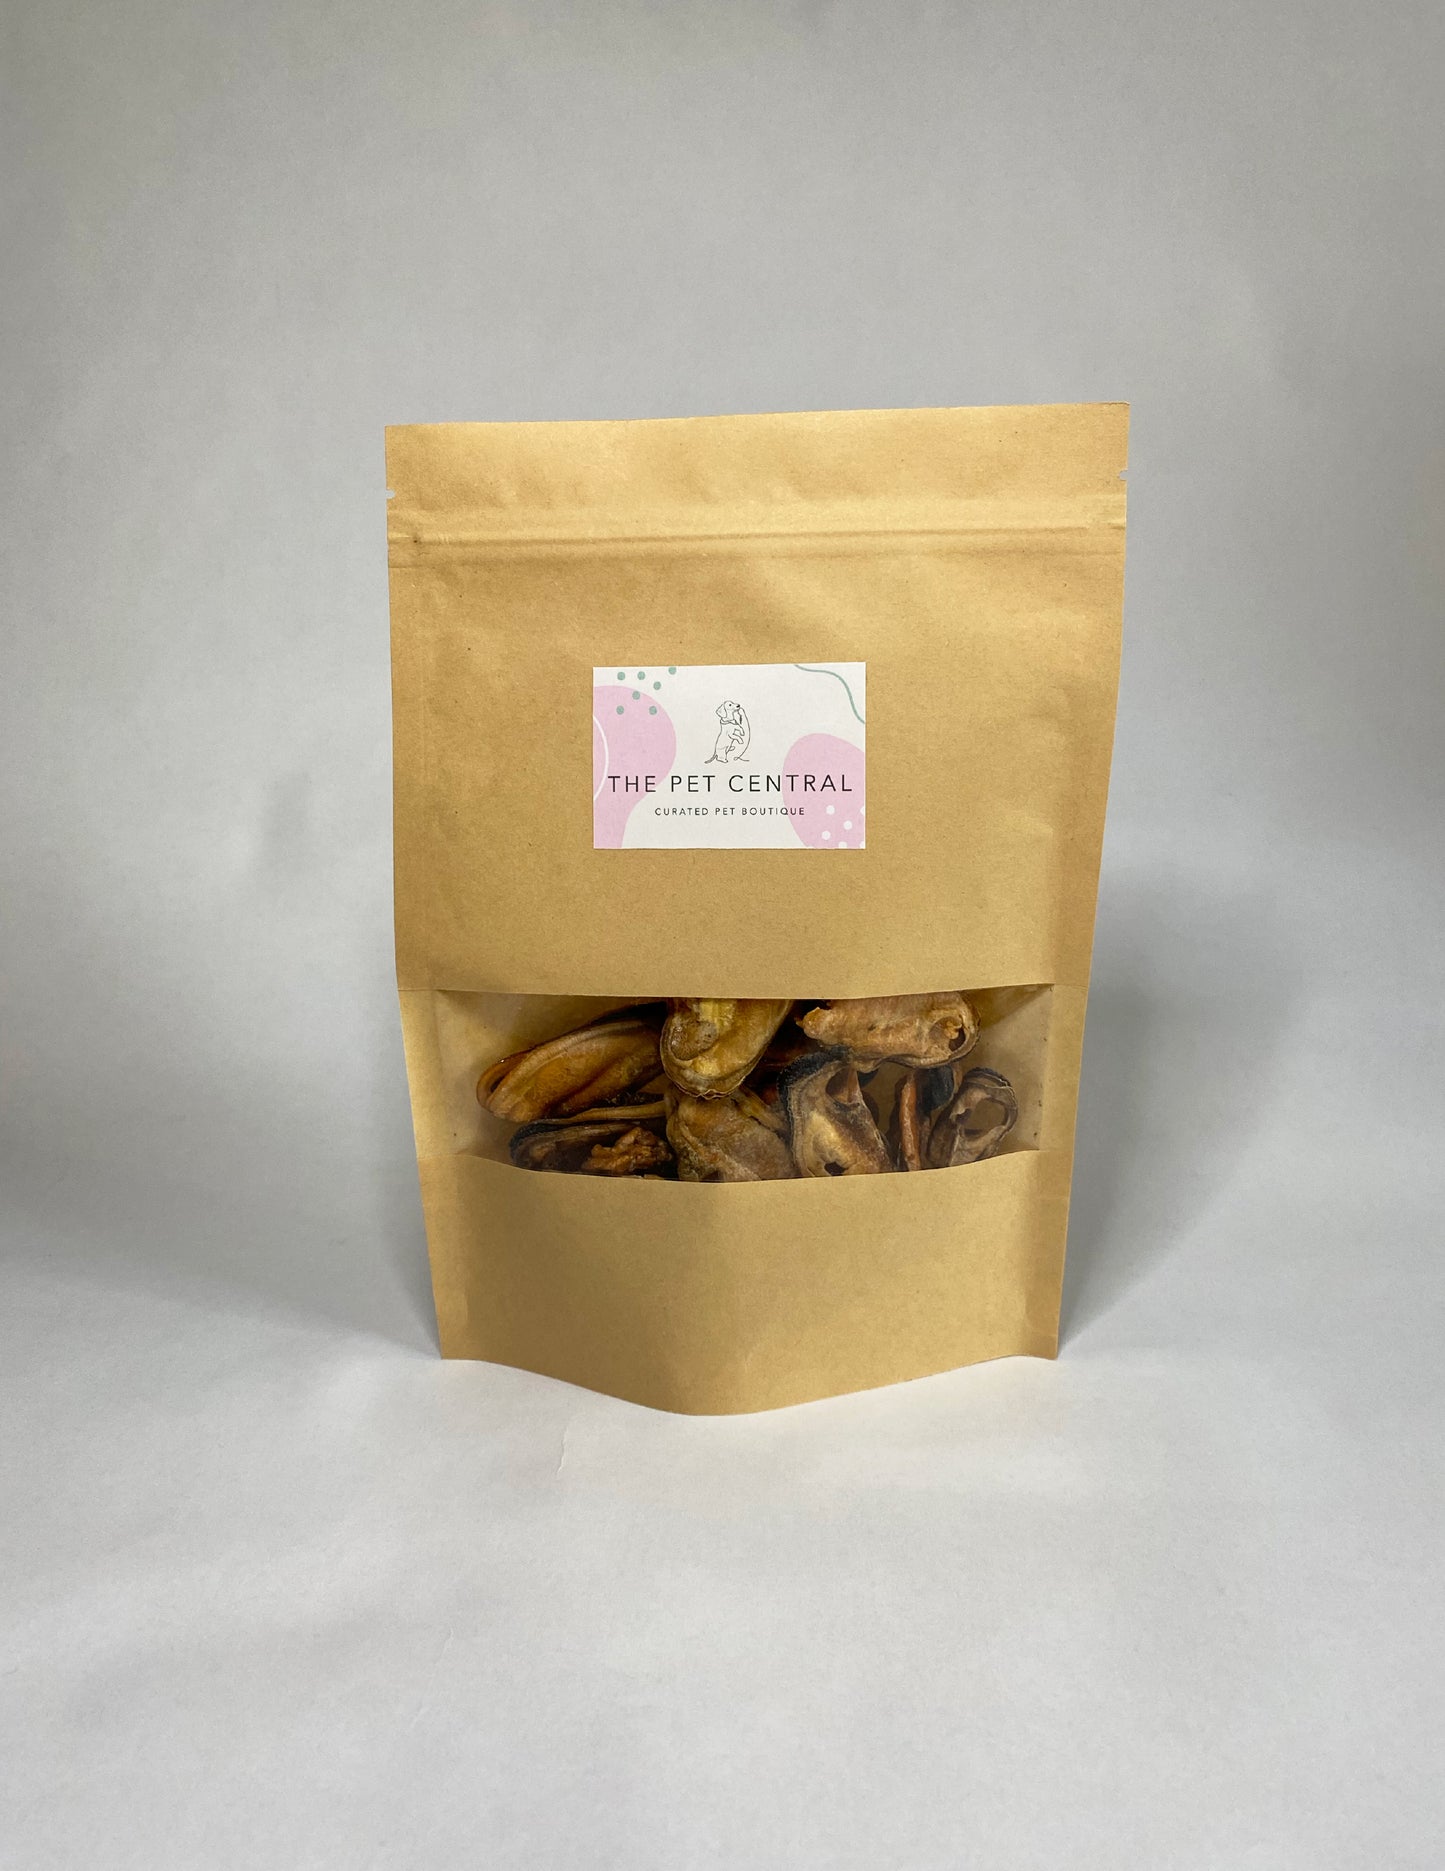 The Pet Central Dog Treats - Green Lipped Mussels